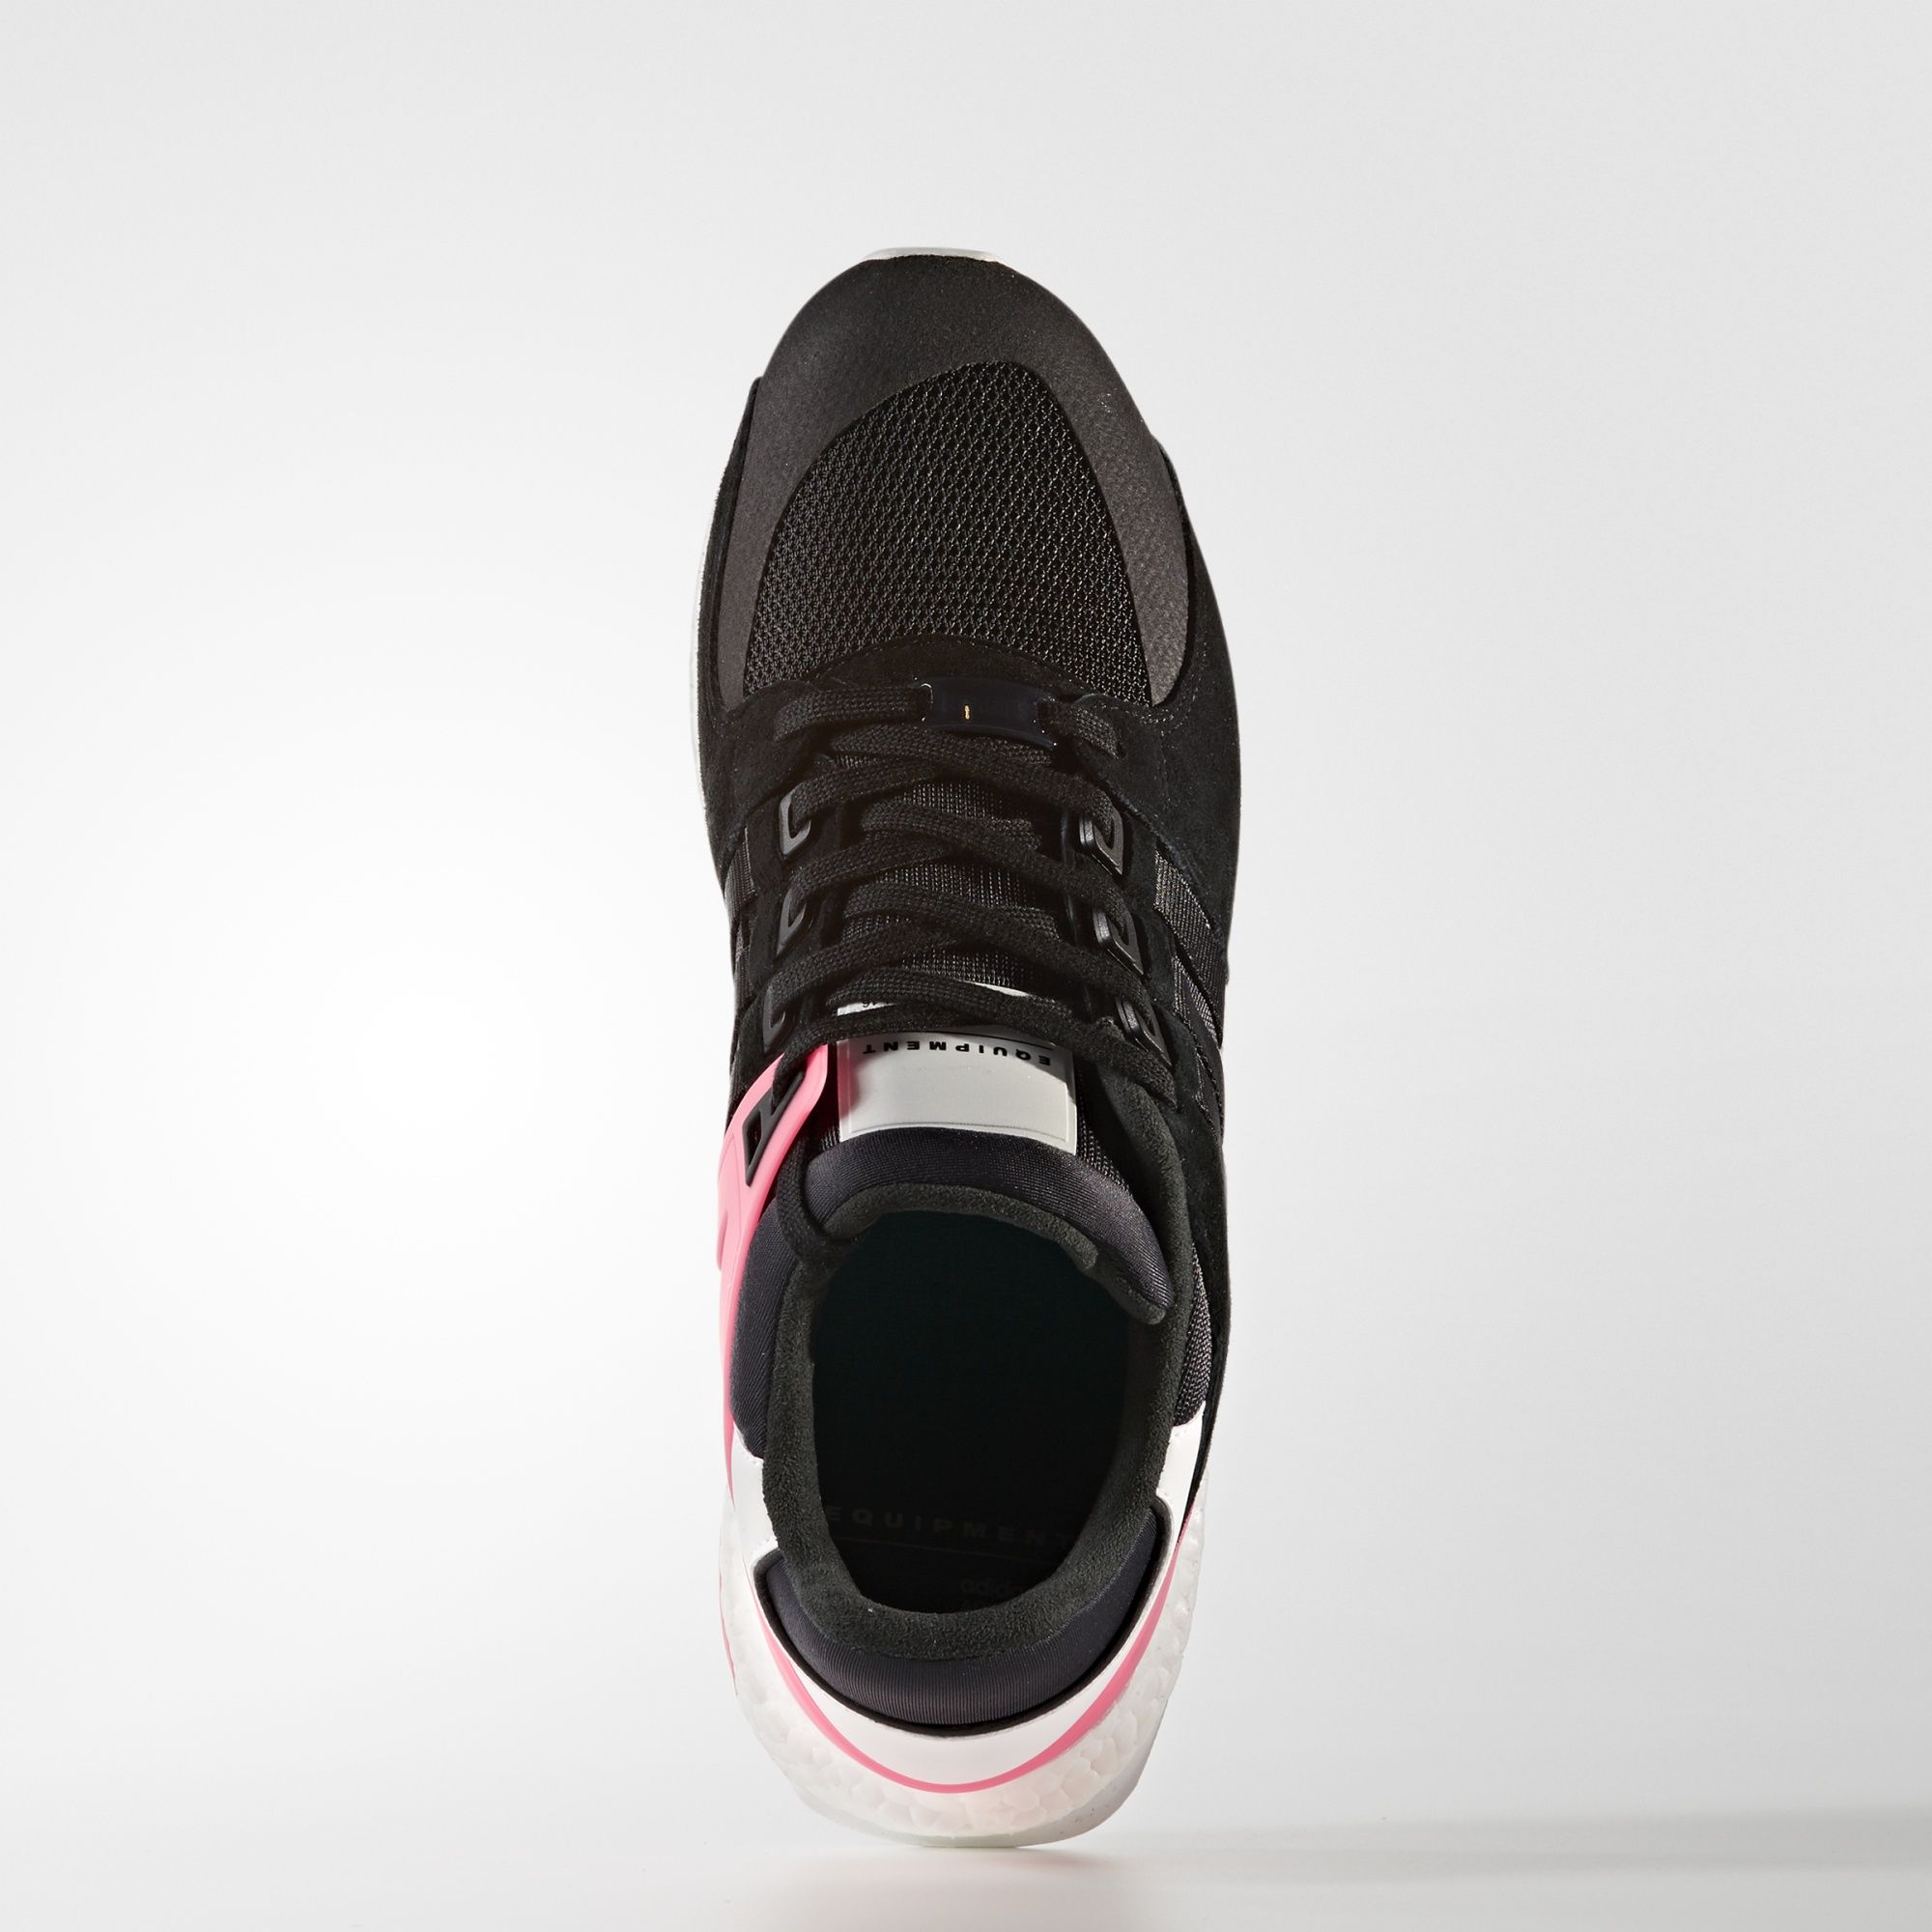 adidas-eqt-support-ultra-boost-turbo-red-7